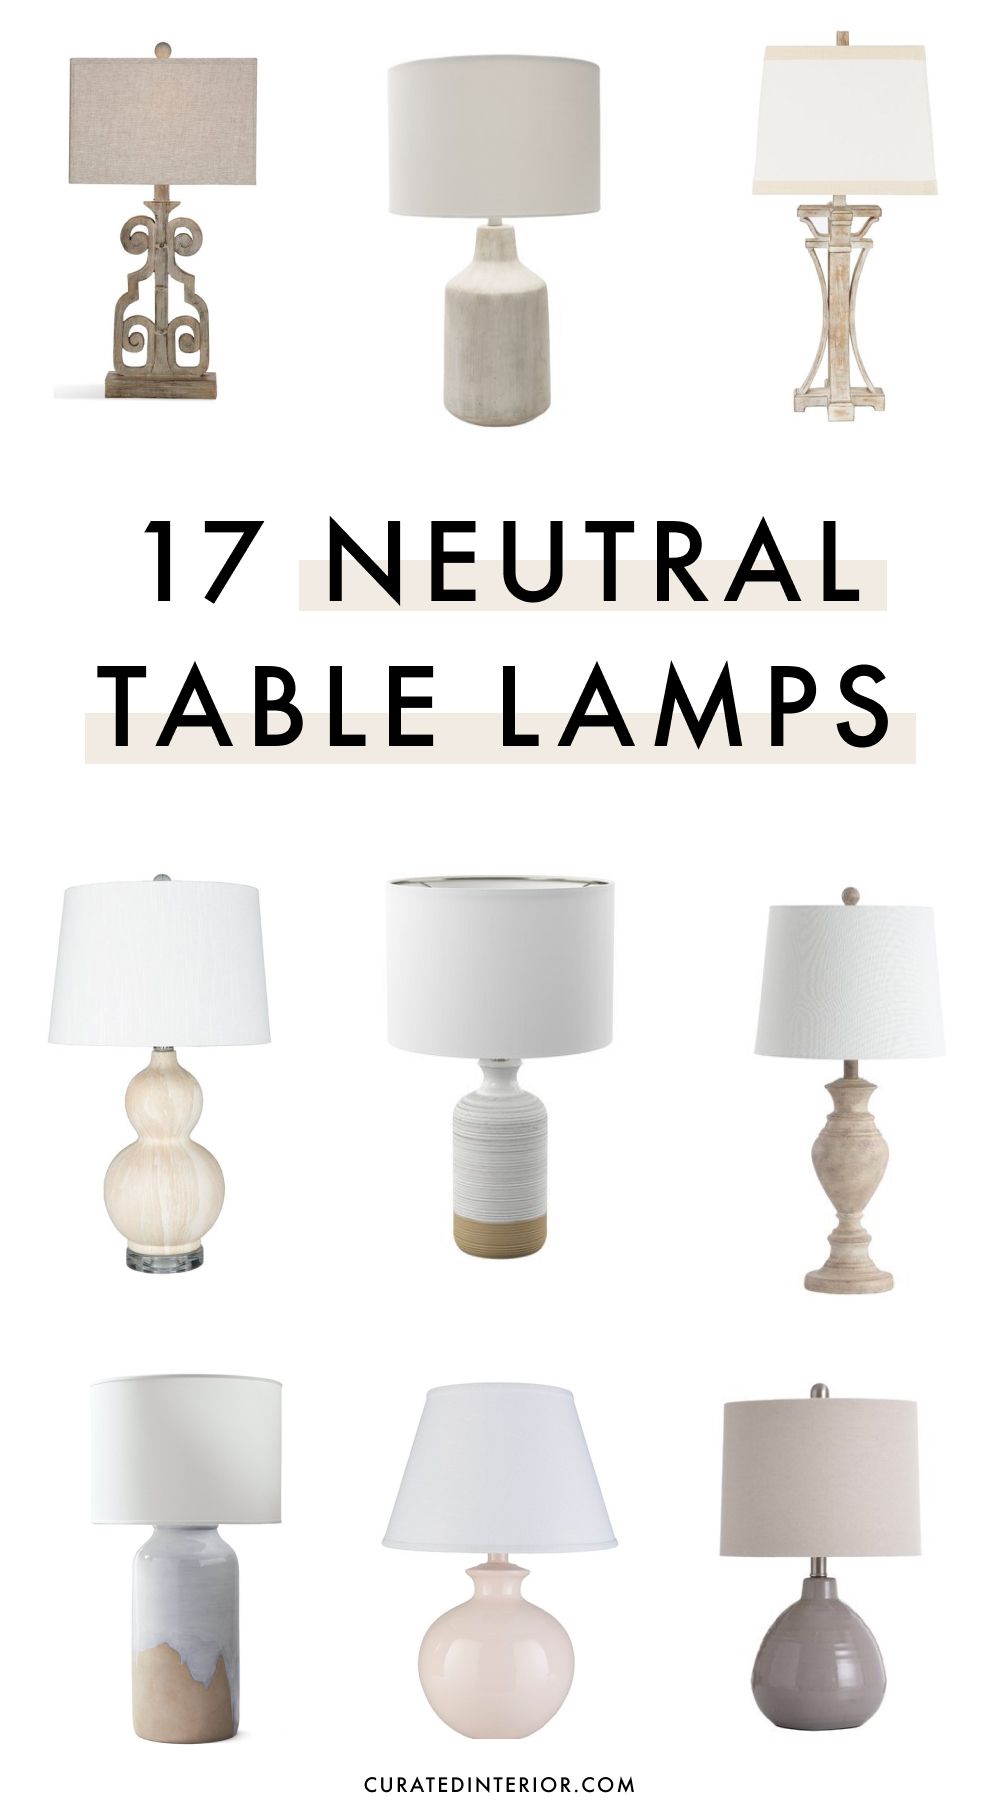 17 Neutral Table Lamps